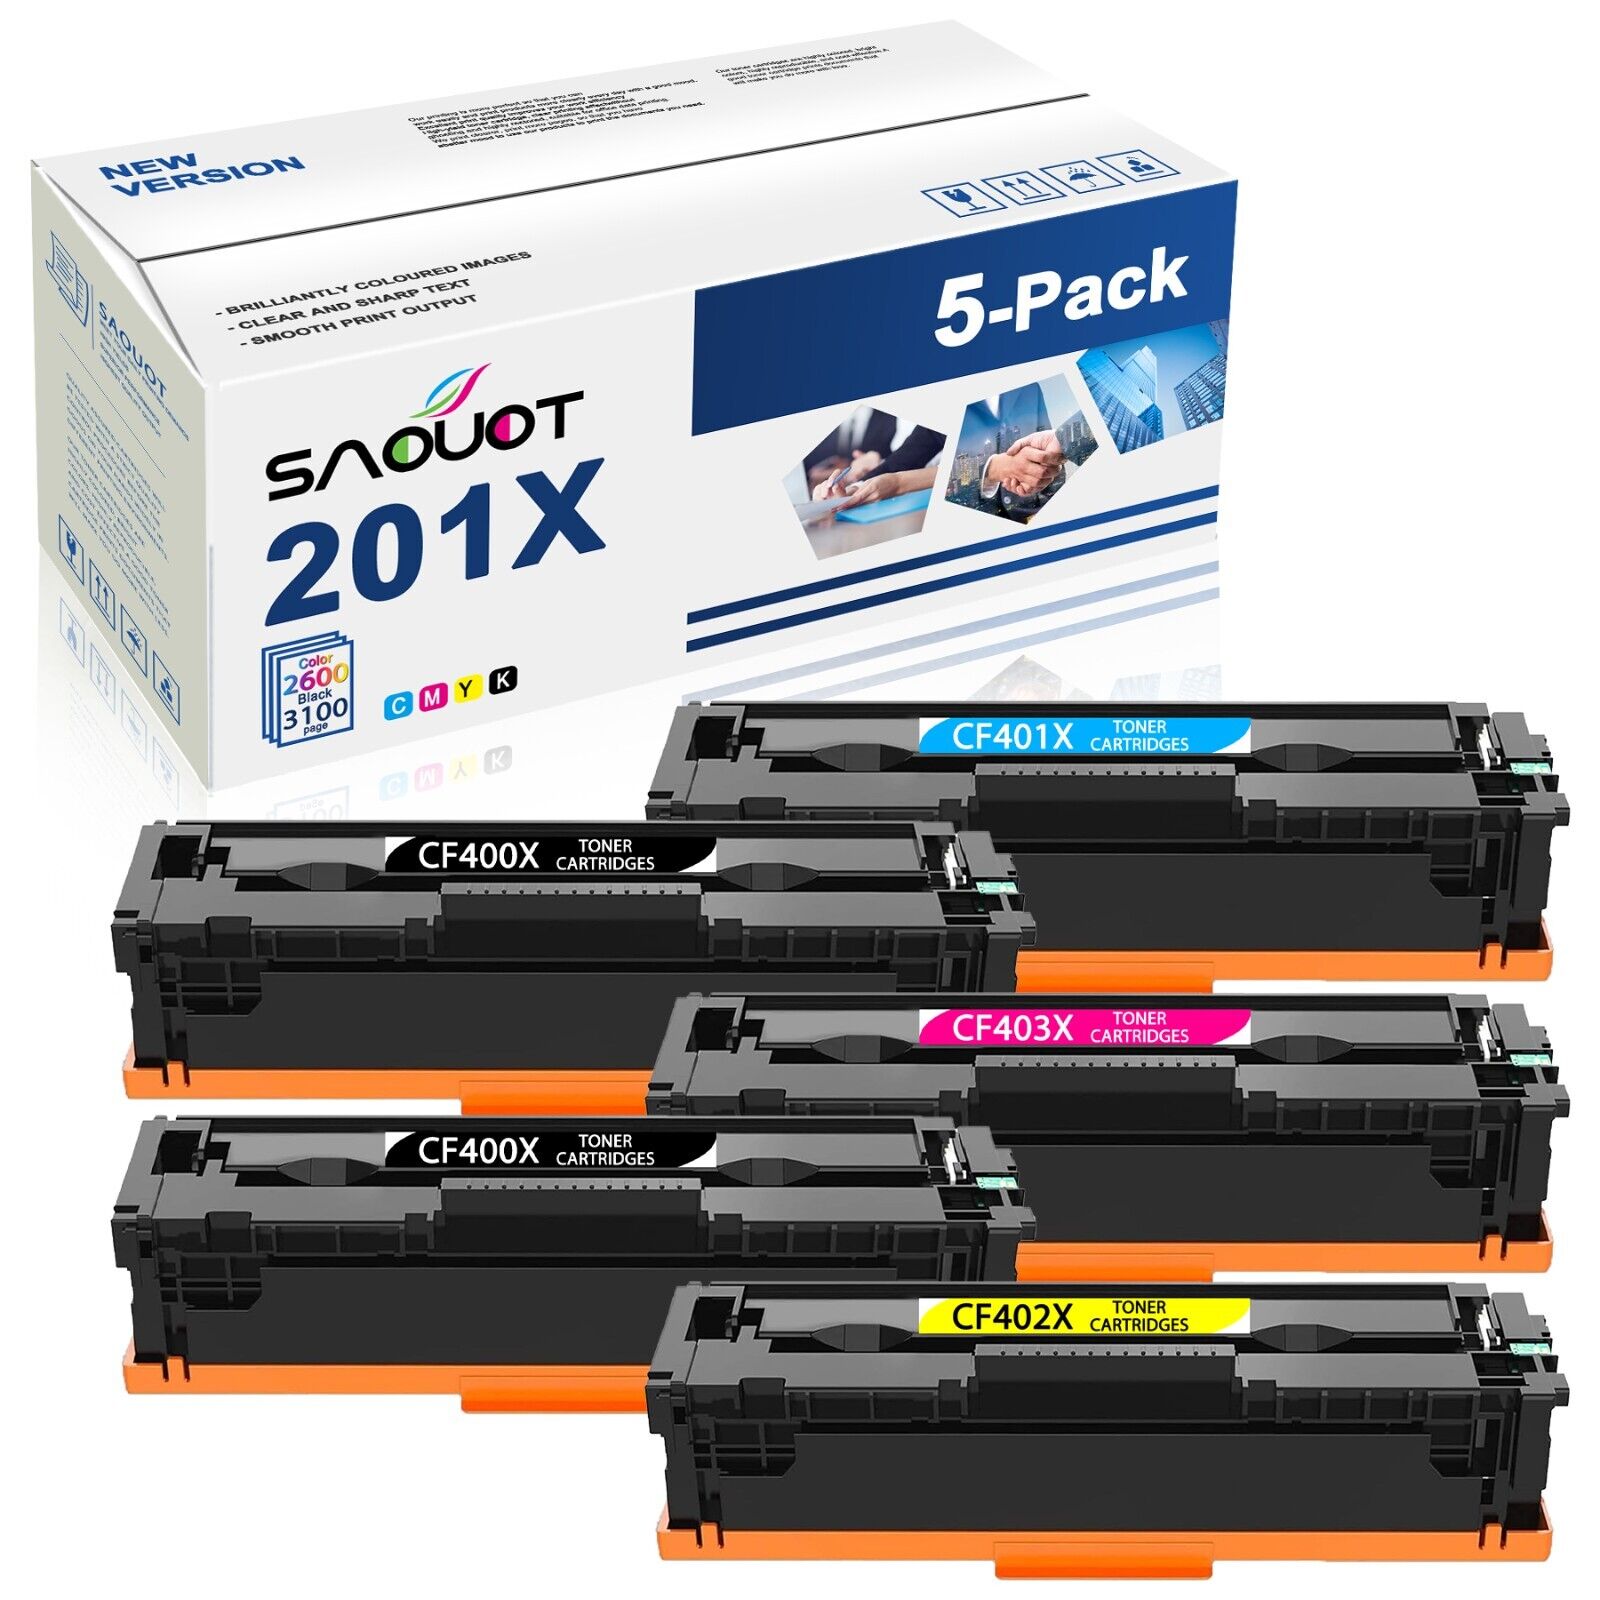 201X CF400X Toner New Replacement for HP 201X Pro M252dw MFP 277dw 2K/1C/1M/1Y